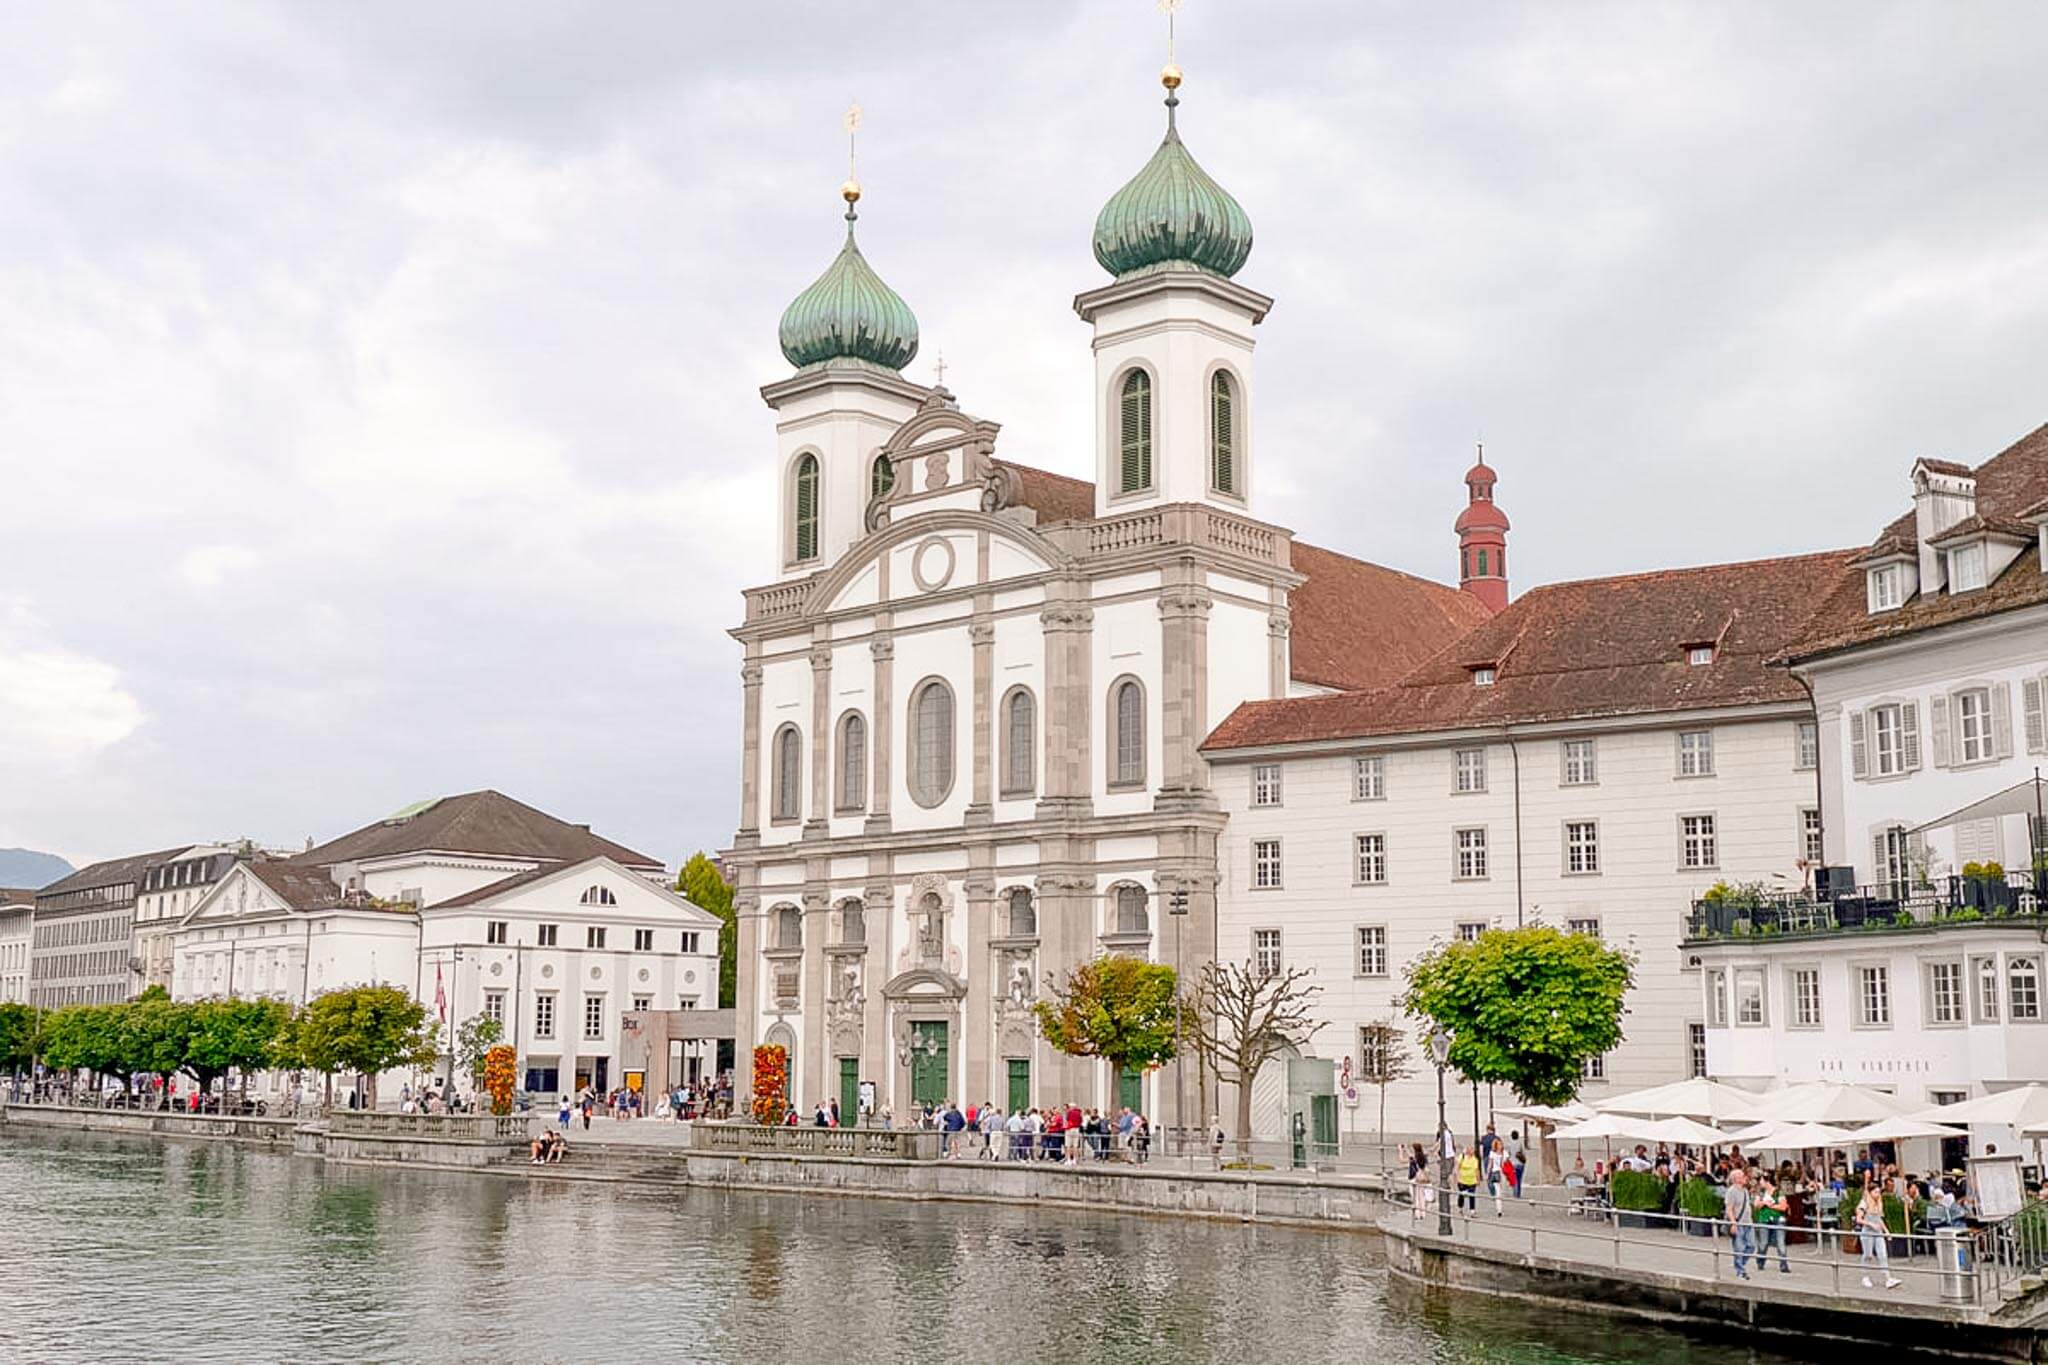 A weekend guide to Lucerne, Switzerland